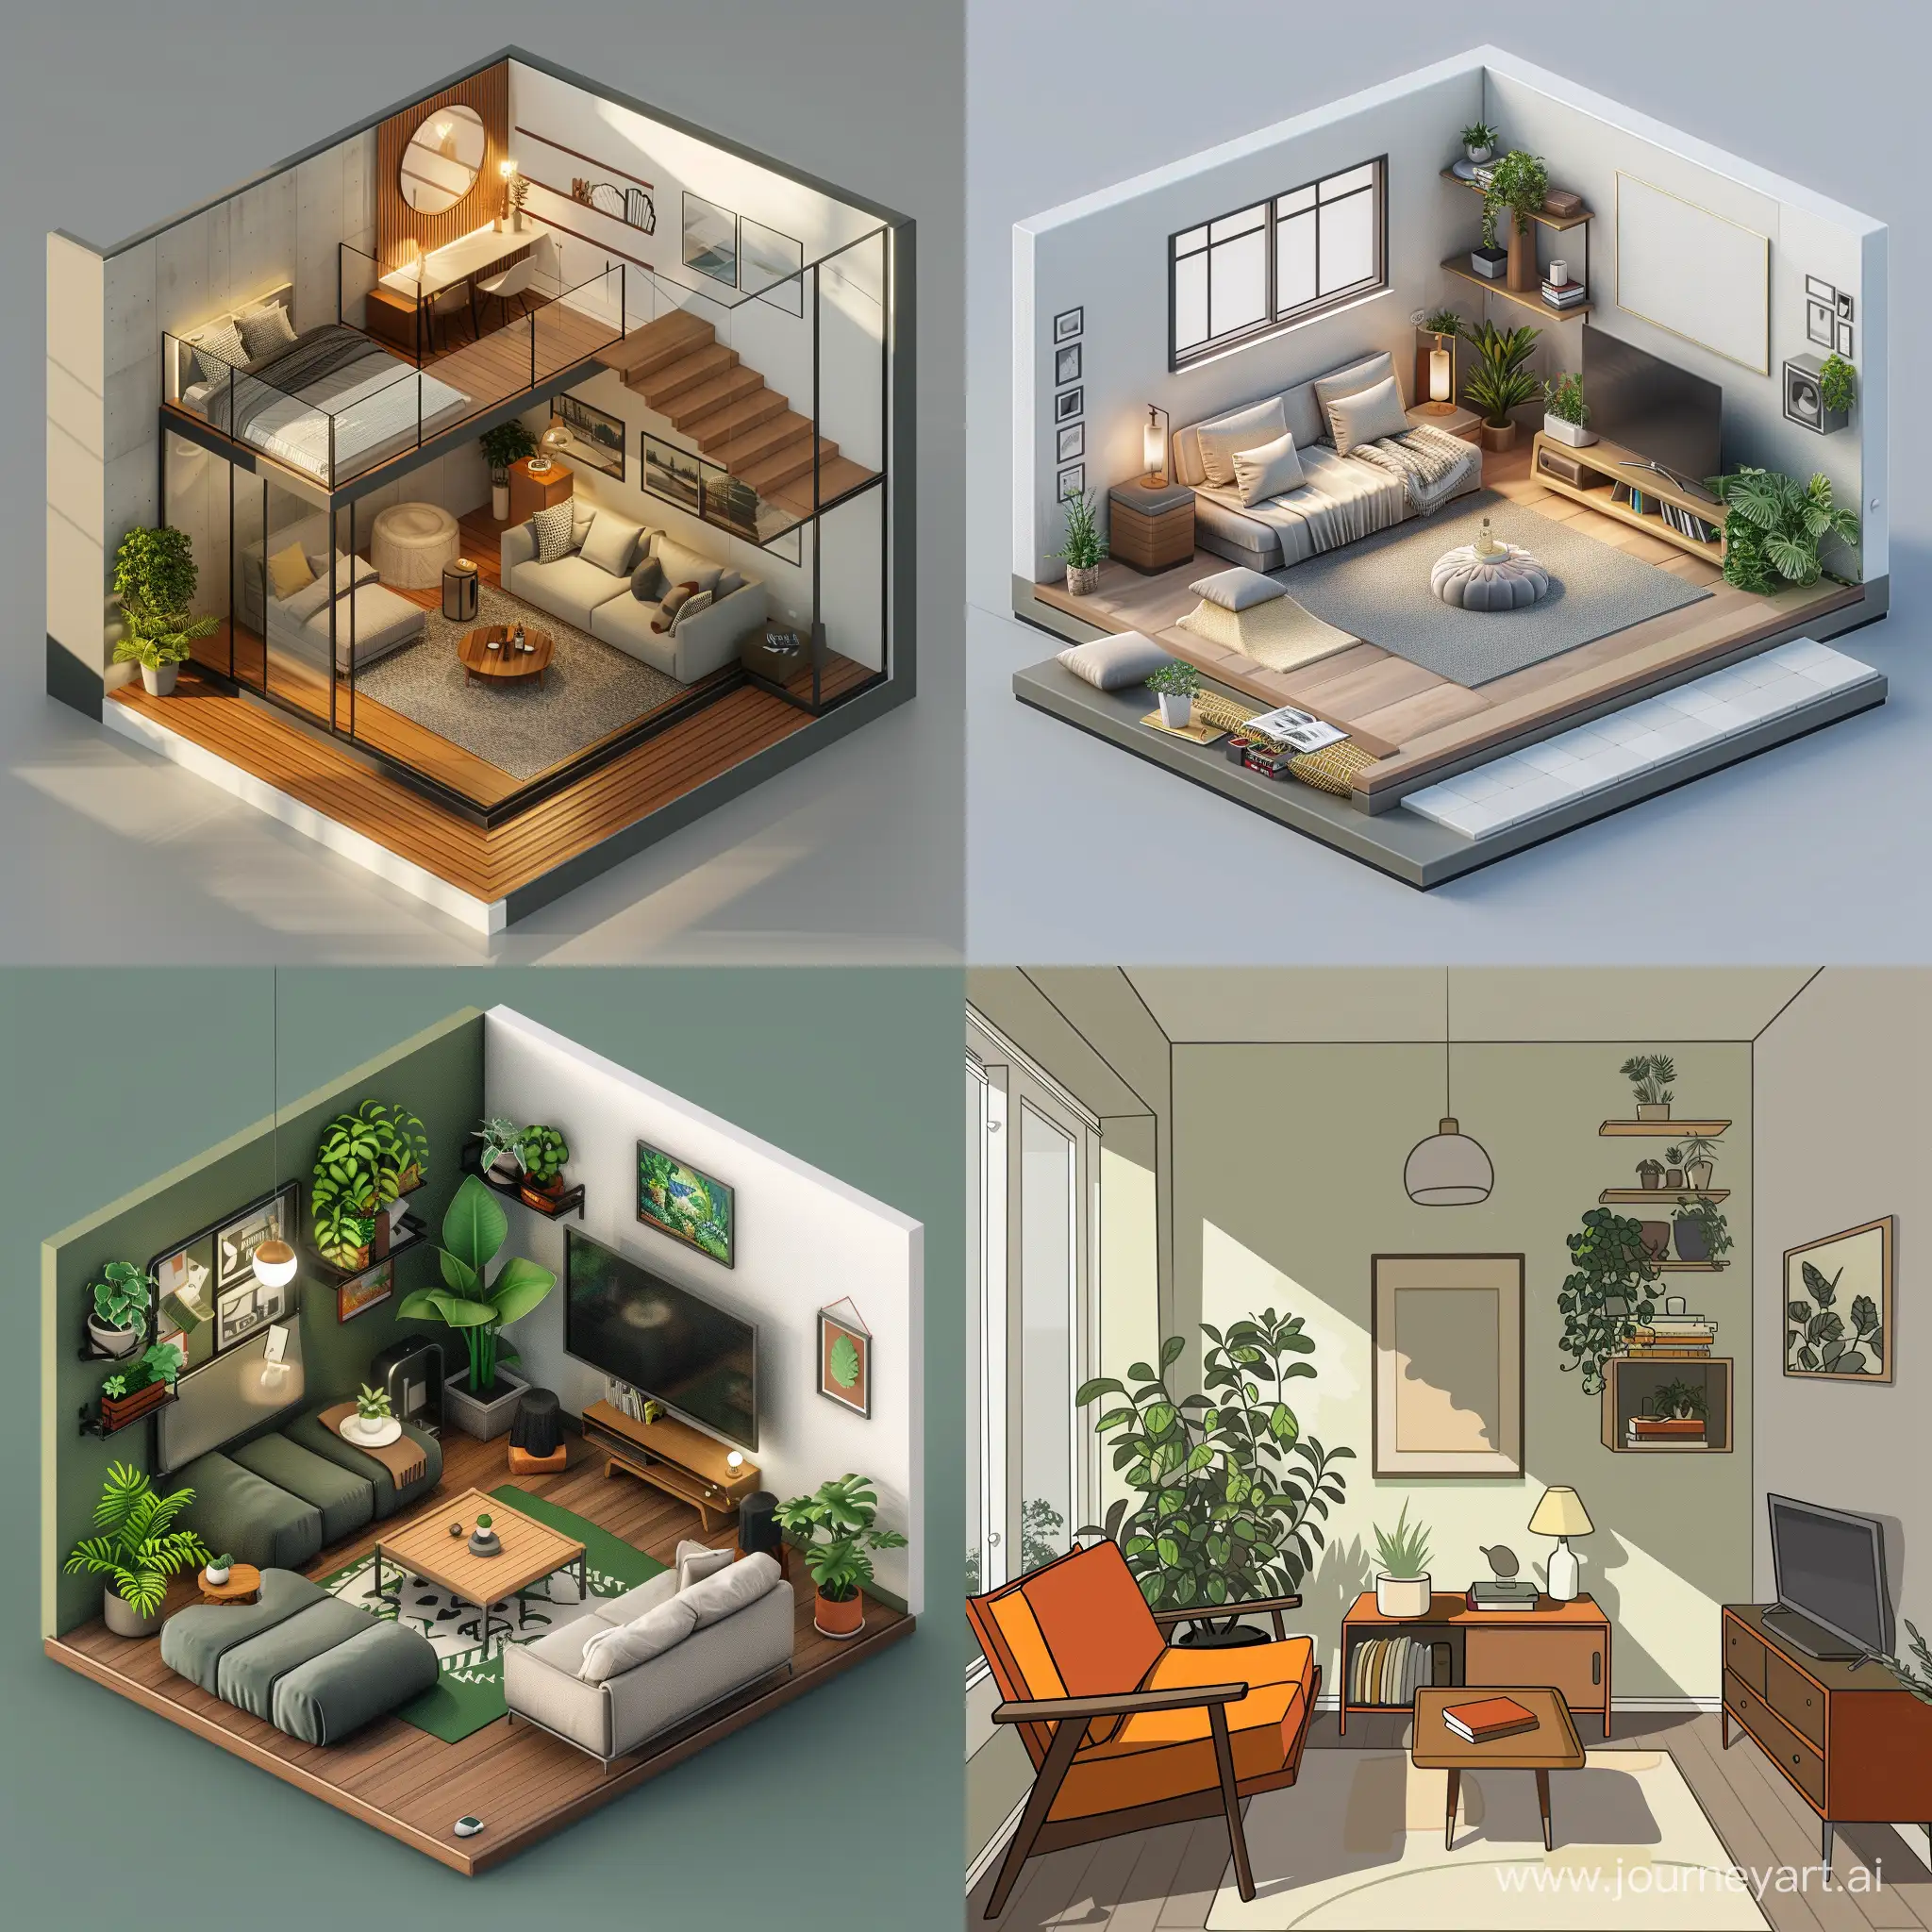 I need to desing the interior of a room that is spacious and cozy to ct=reate a desing in figma